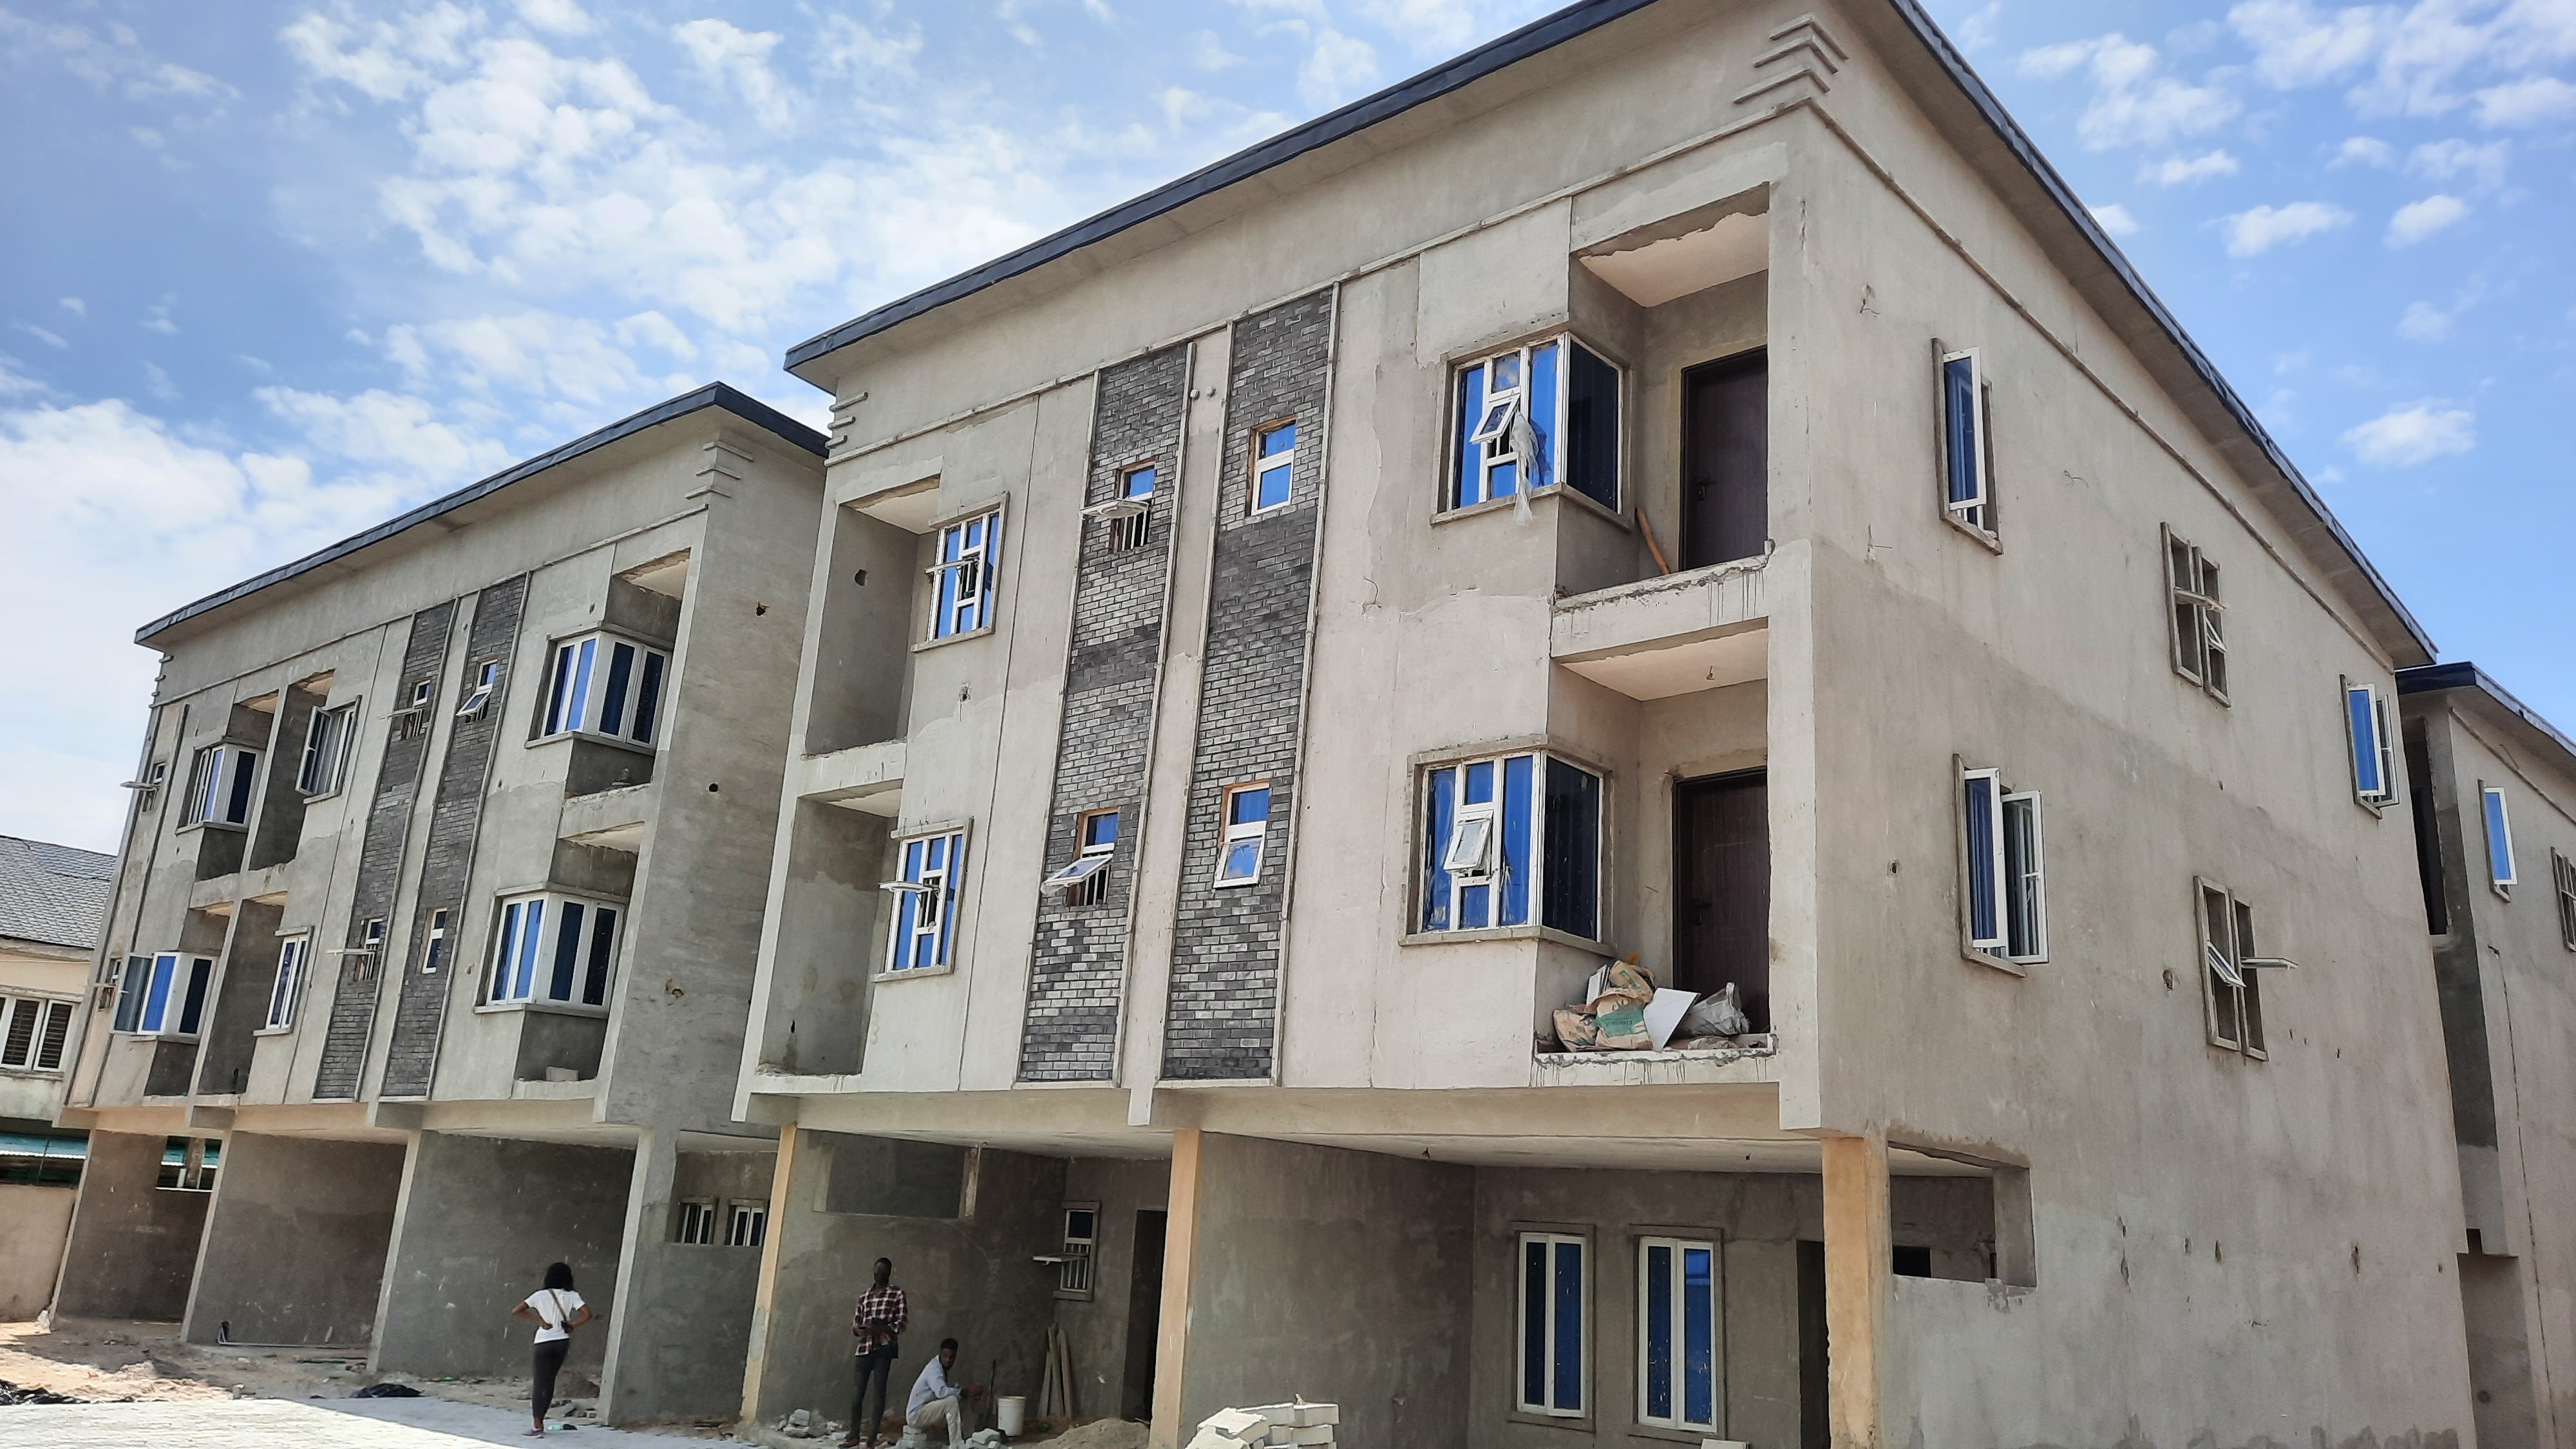 4 bedrooms Terraced Duplex for sale at Ikate